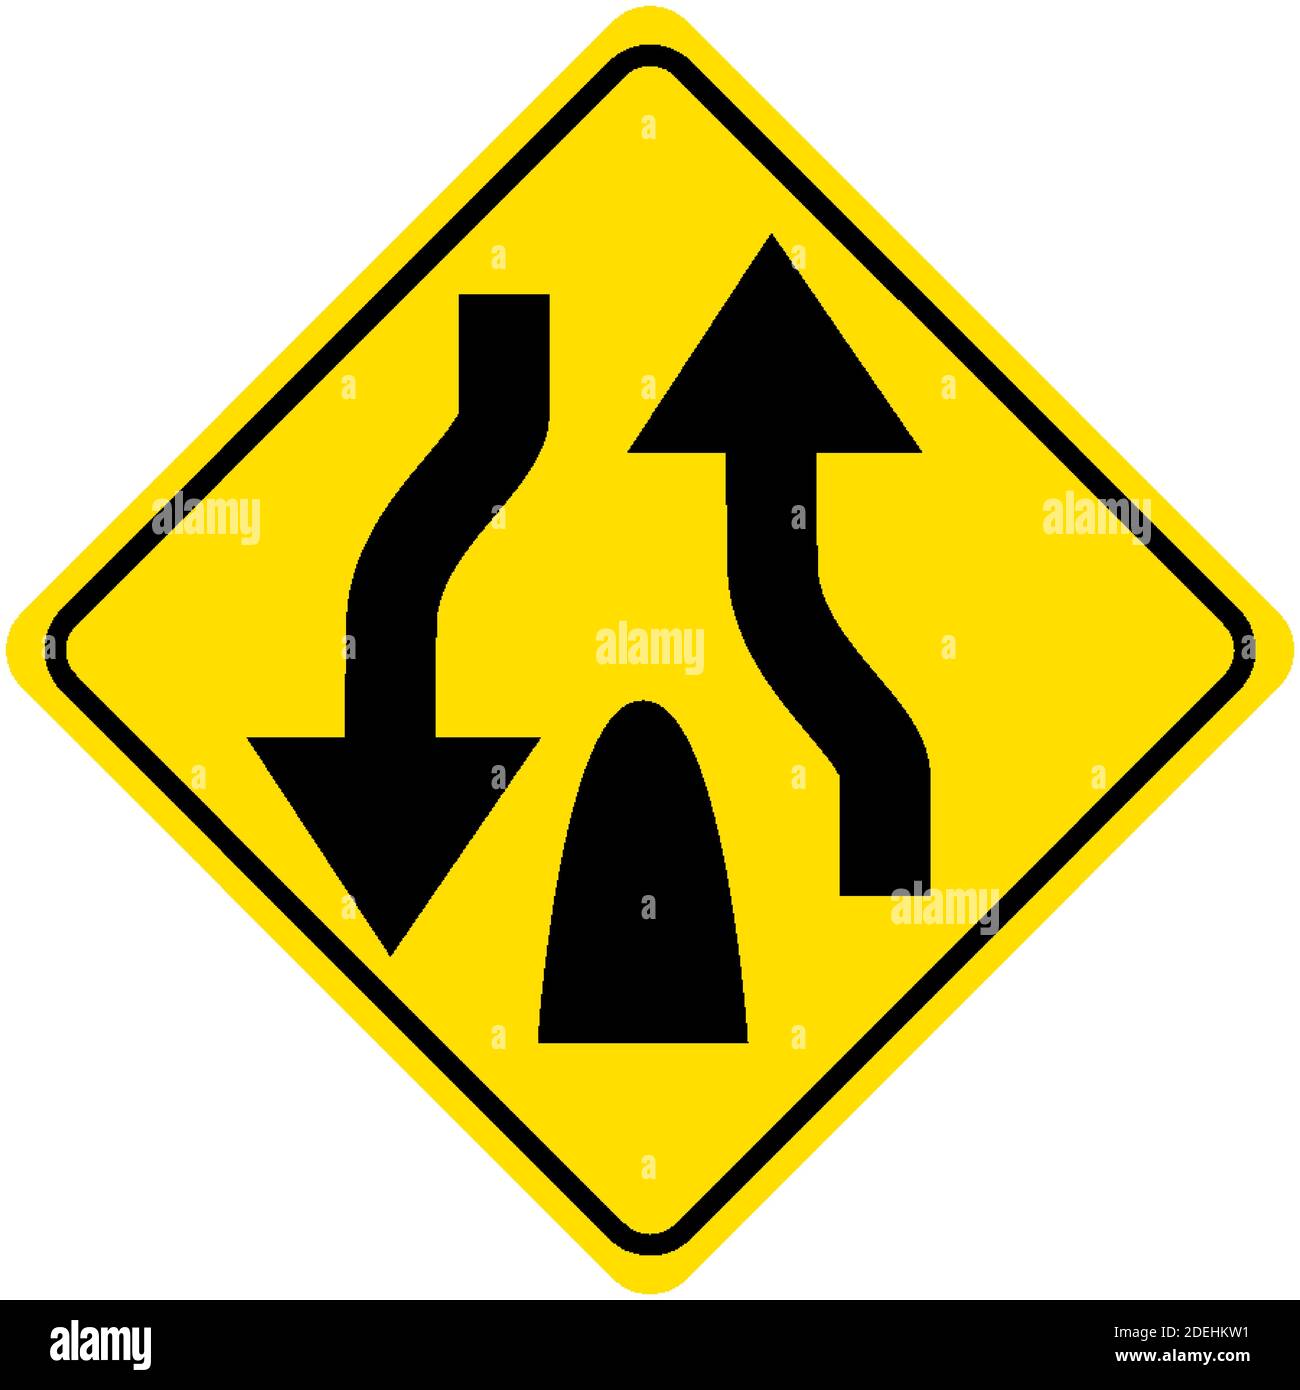 Warning sign for the end of a divided road on white background illustration Stock Vector